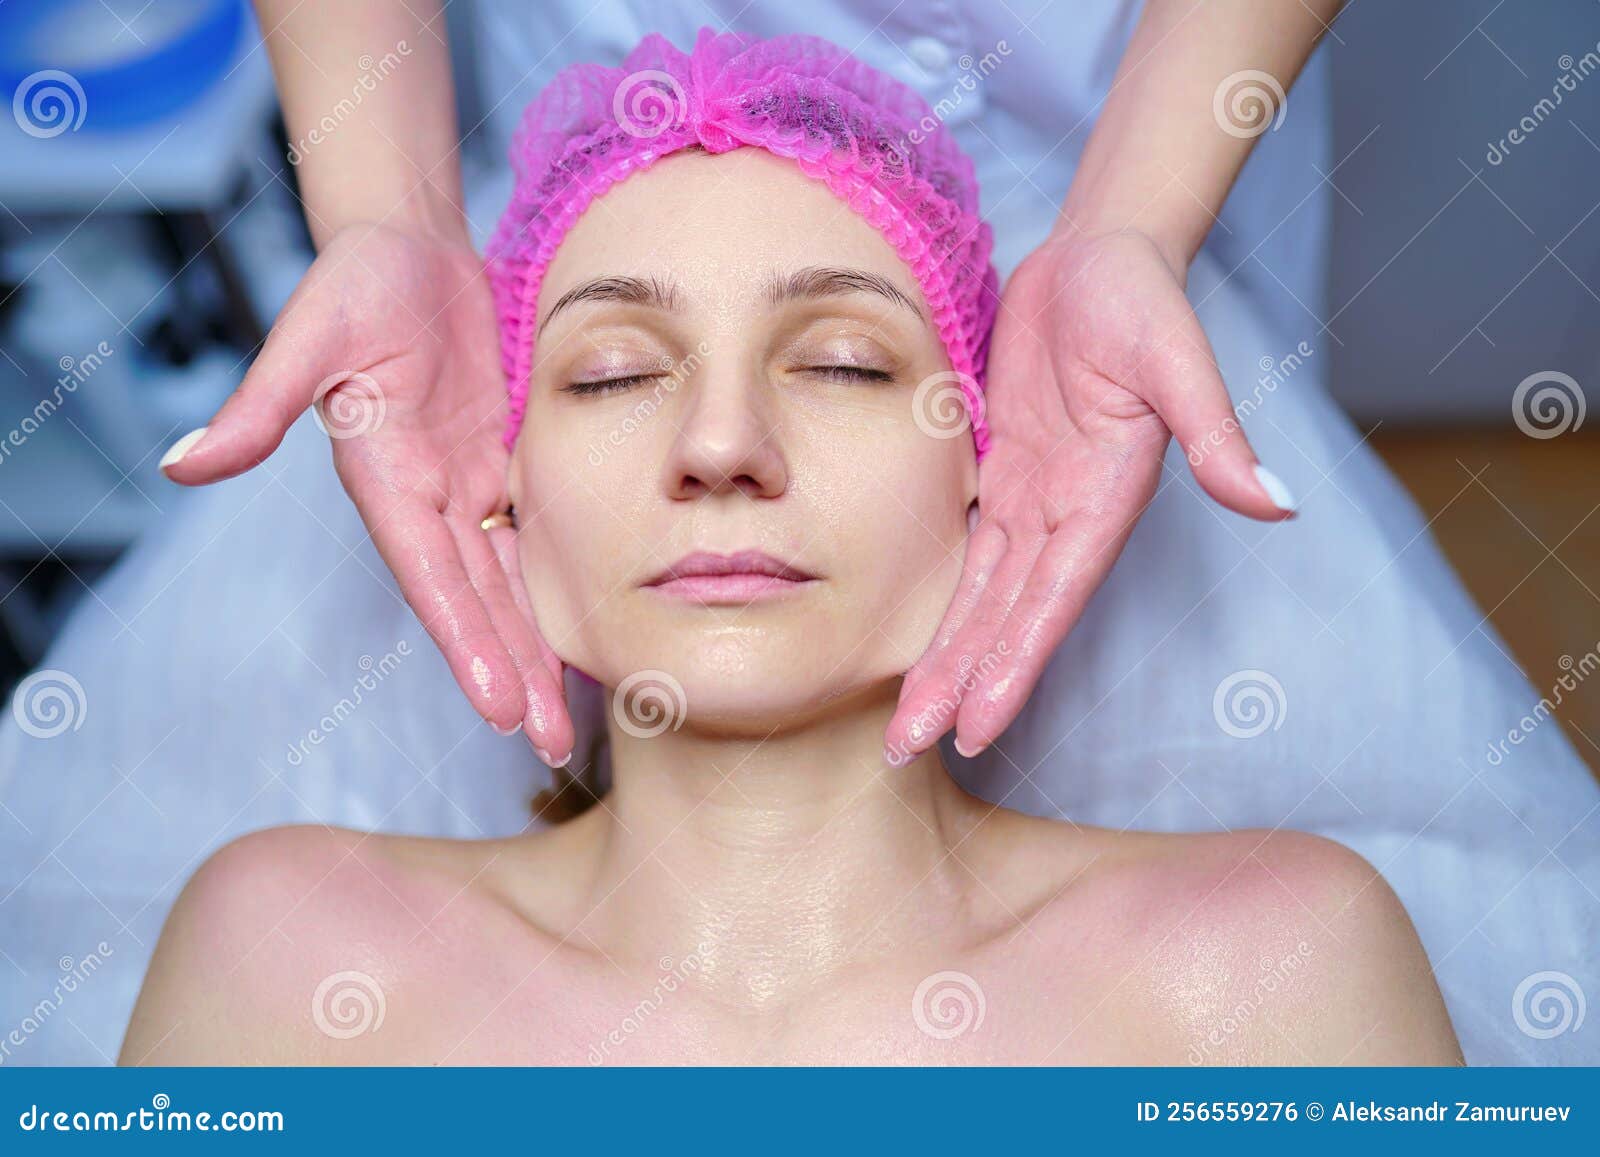 Attractive Female At Spa Health Club Getting A Facial Massage Beautician Doing Massage Of Face